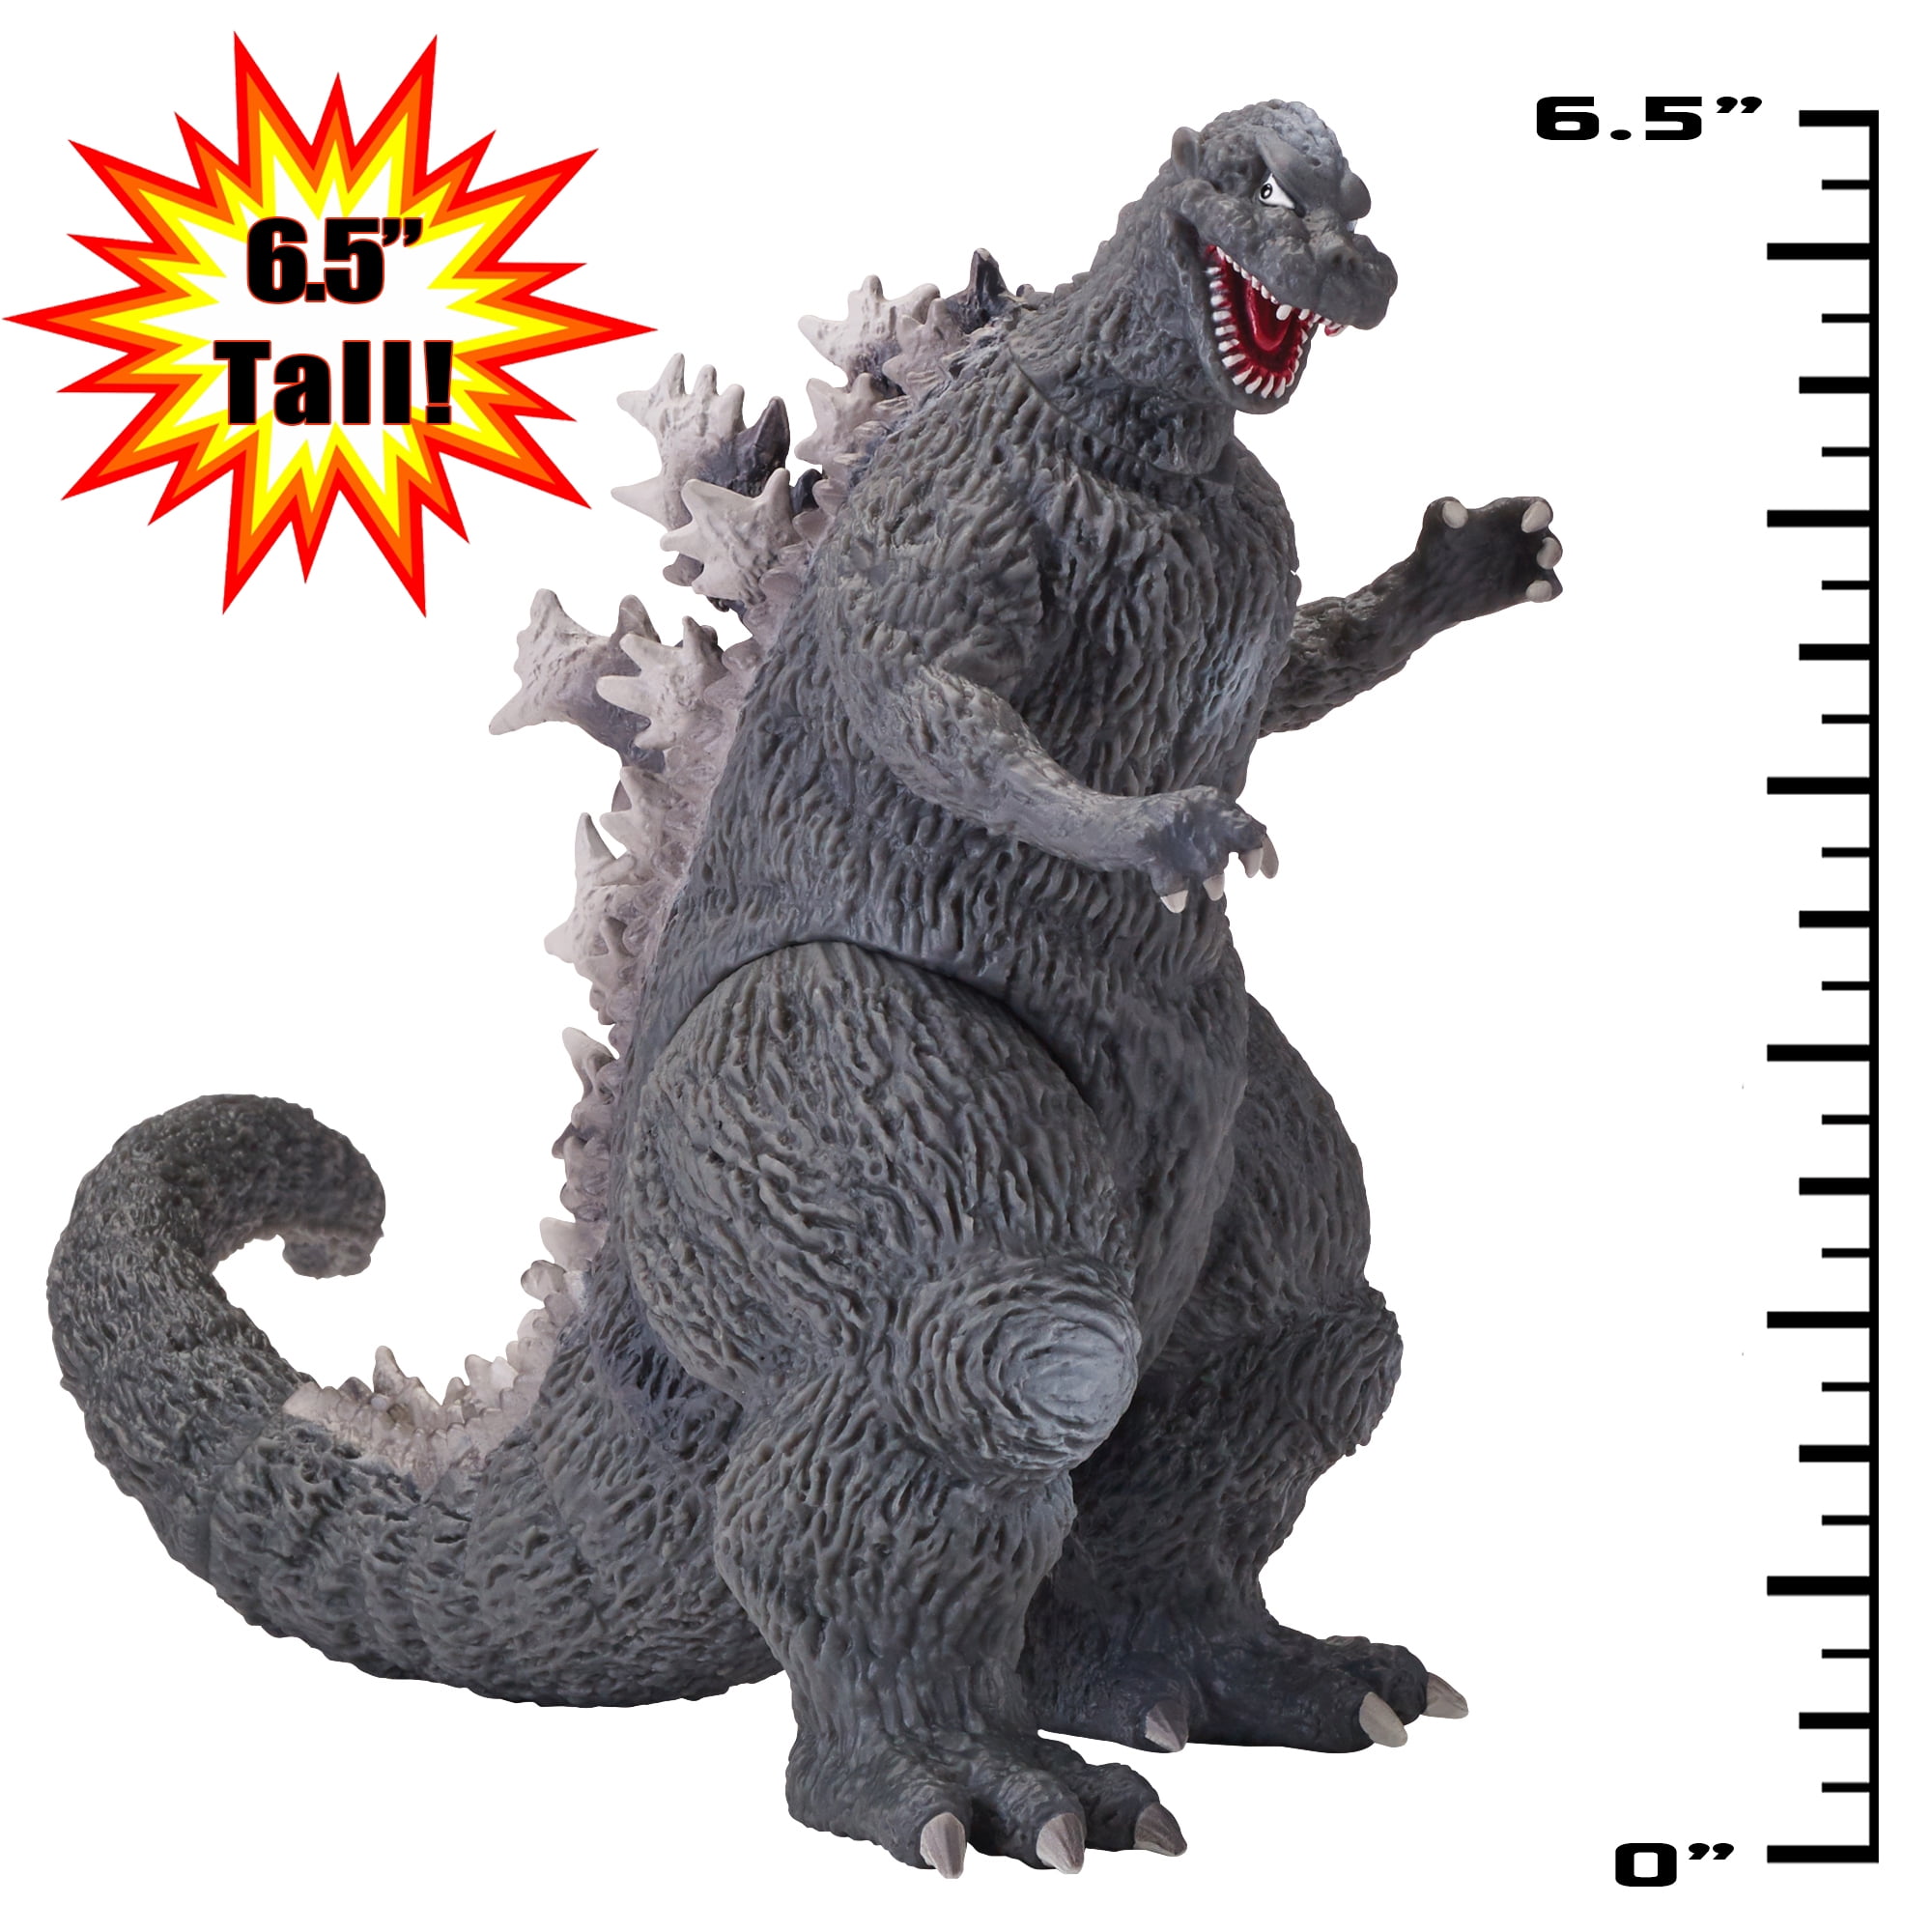 Details about   Bandai 60th Anniversary 1954 Godzilla ✰ King Ceasar ✰ Figure BRAND NEW 6" series 